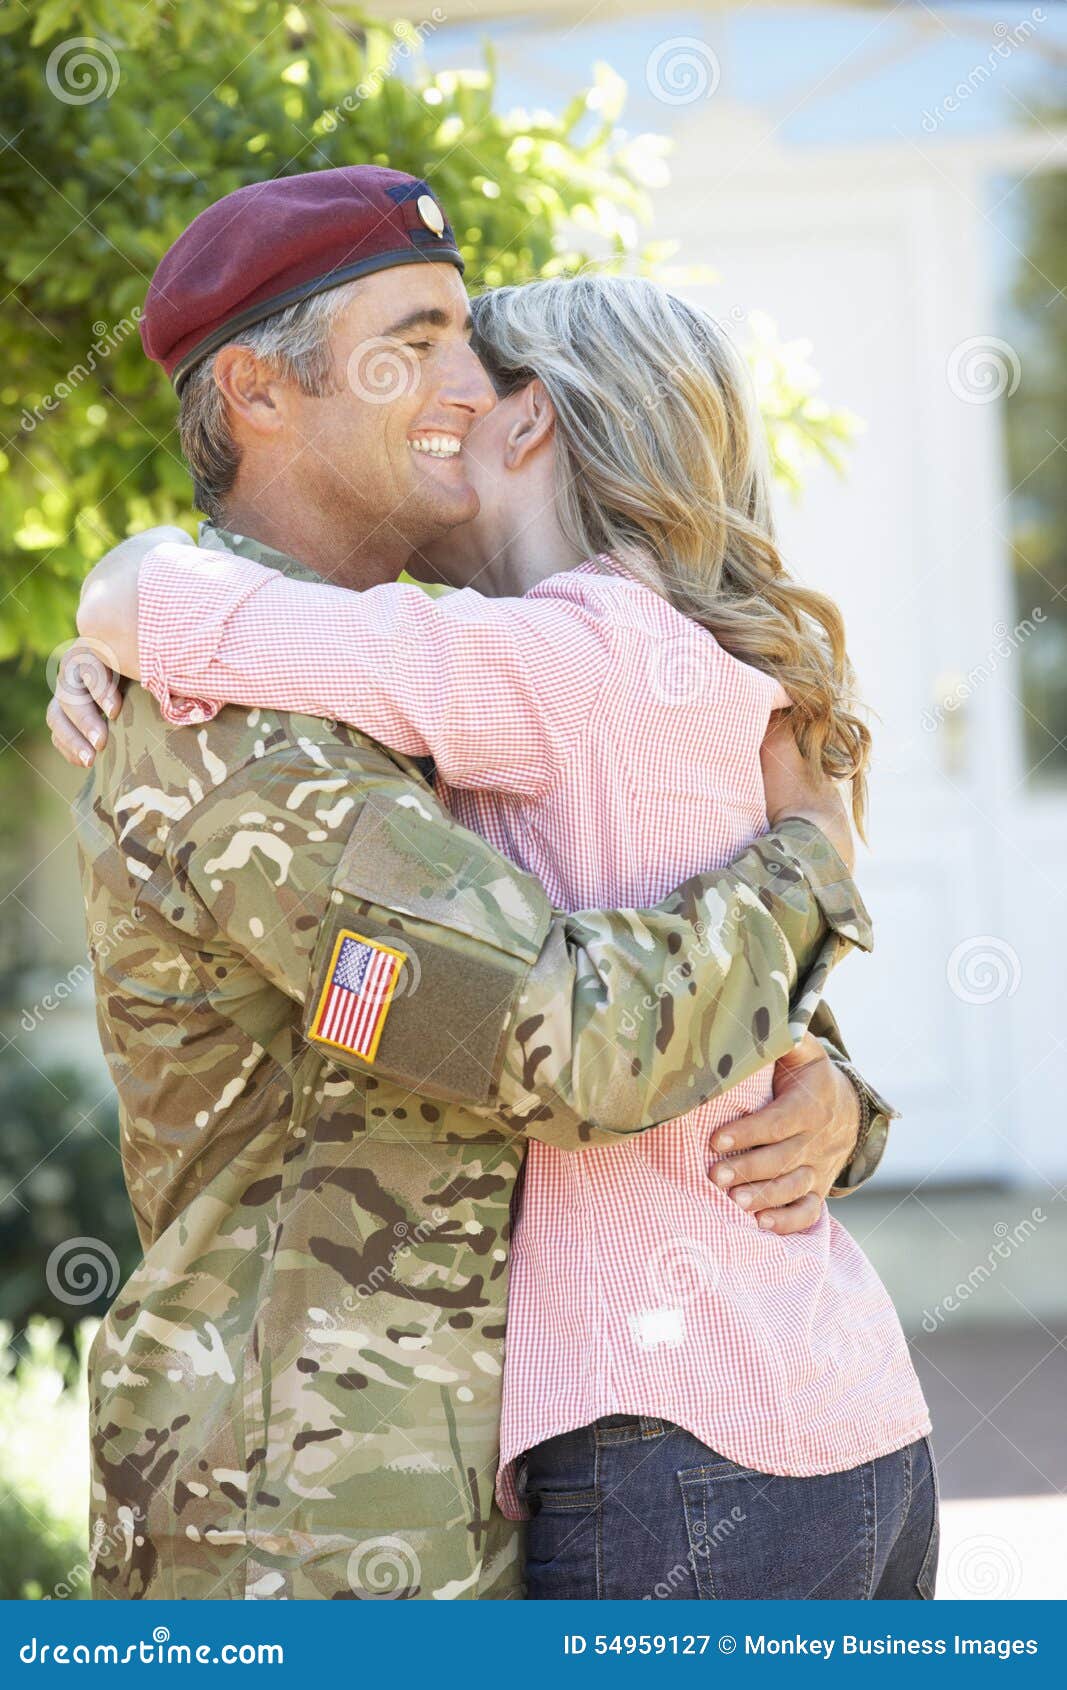 wifey welcoming home young soldier Porn Photos Hd